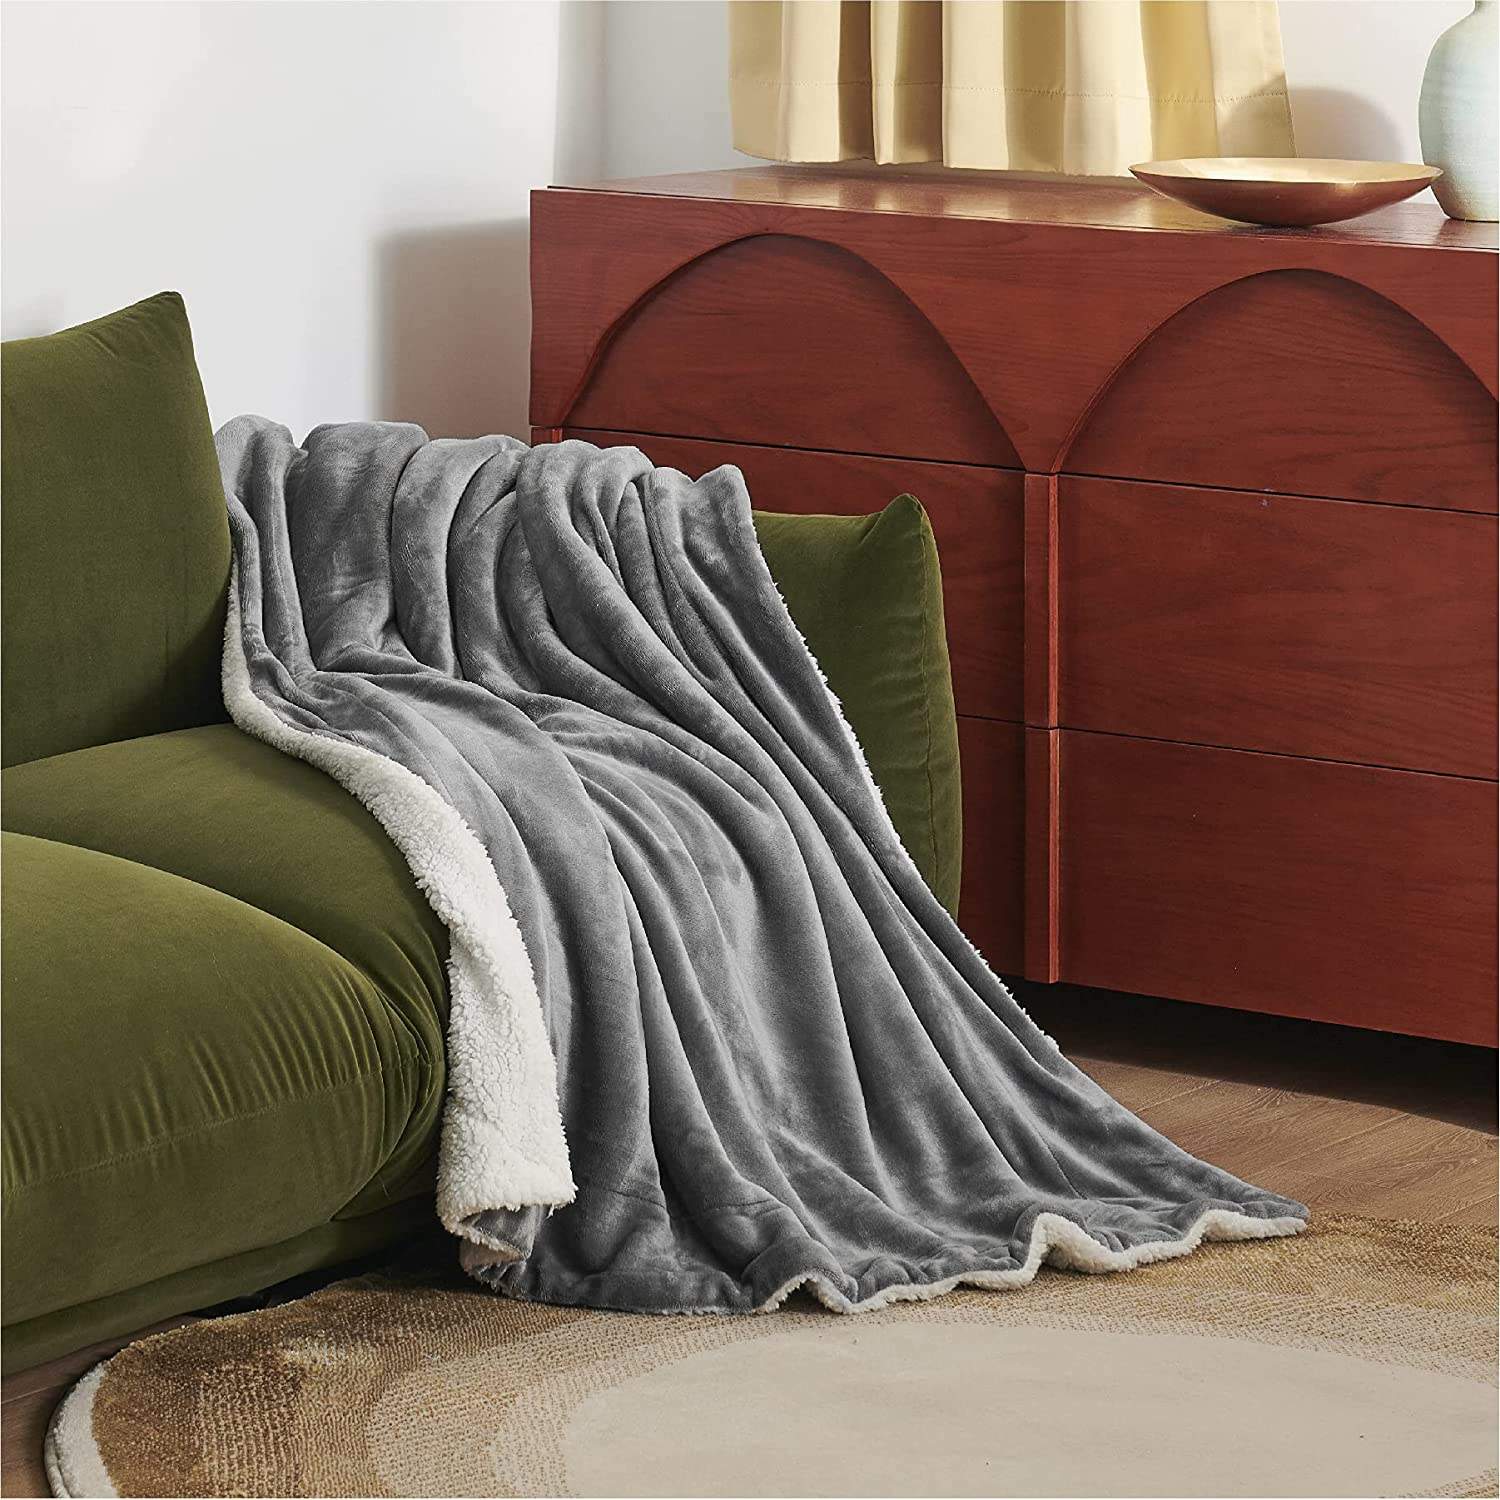 Sherpa Throw Blankets - King Size Cozy & Warm-Pierre Donna-blanket,delicate,double blanket,feels,flannel,sherpa,skin,soft,thermal,this,throw,warm,warmth,with